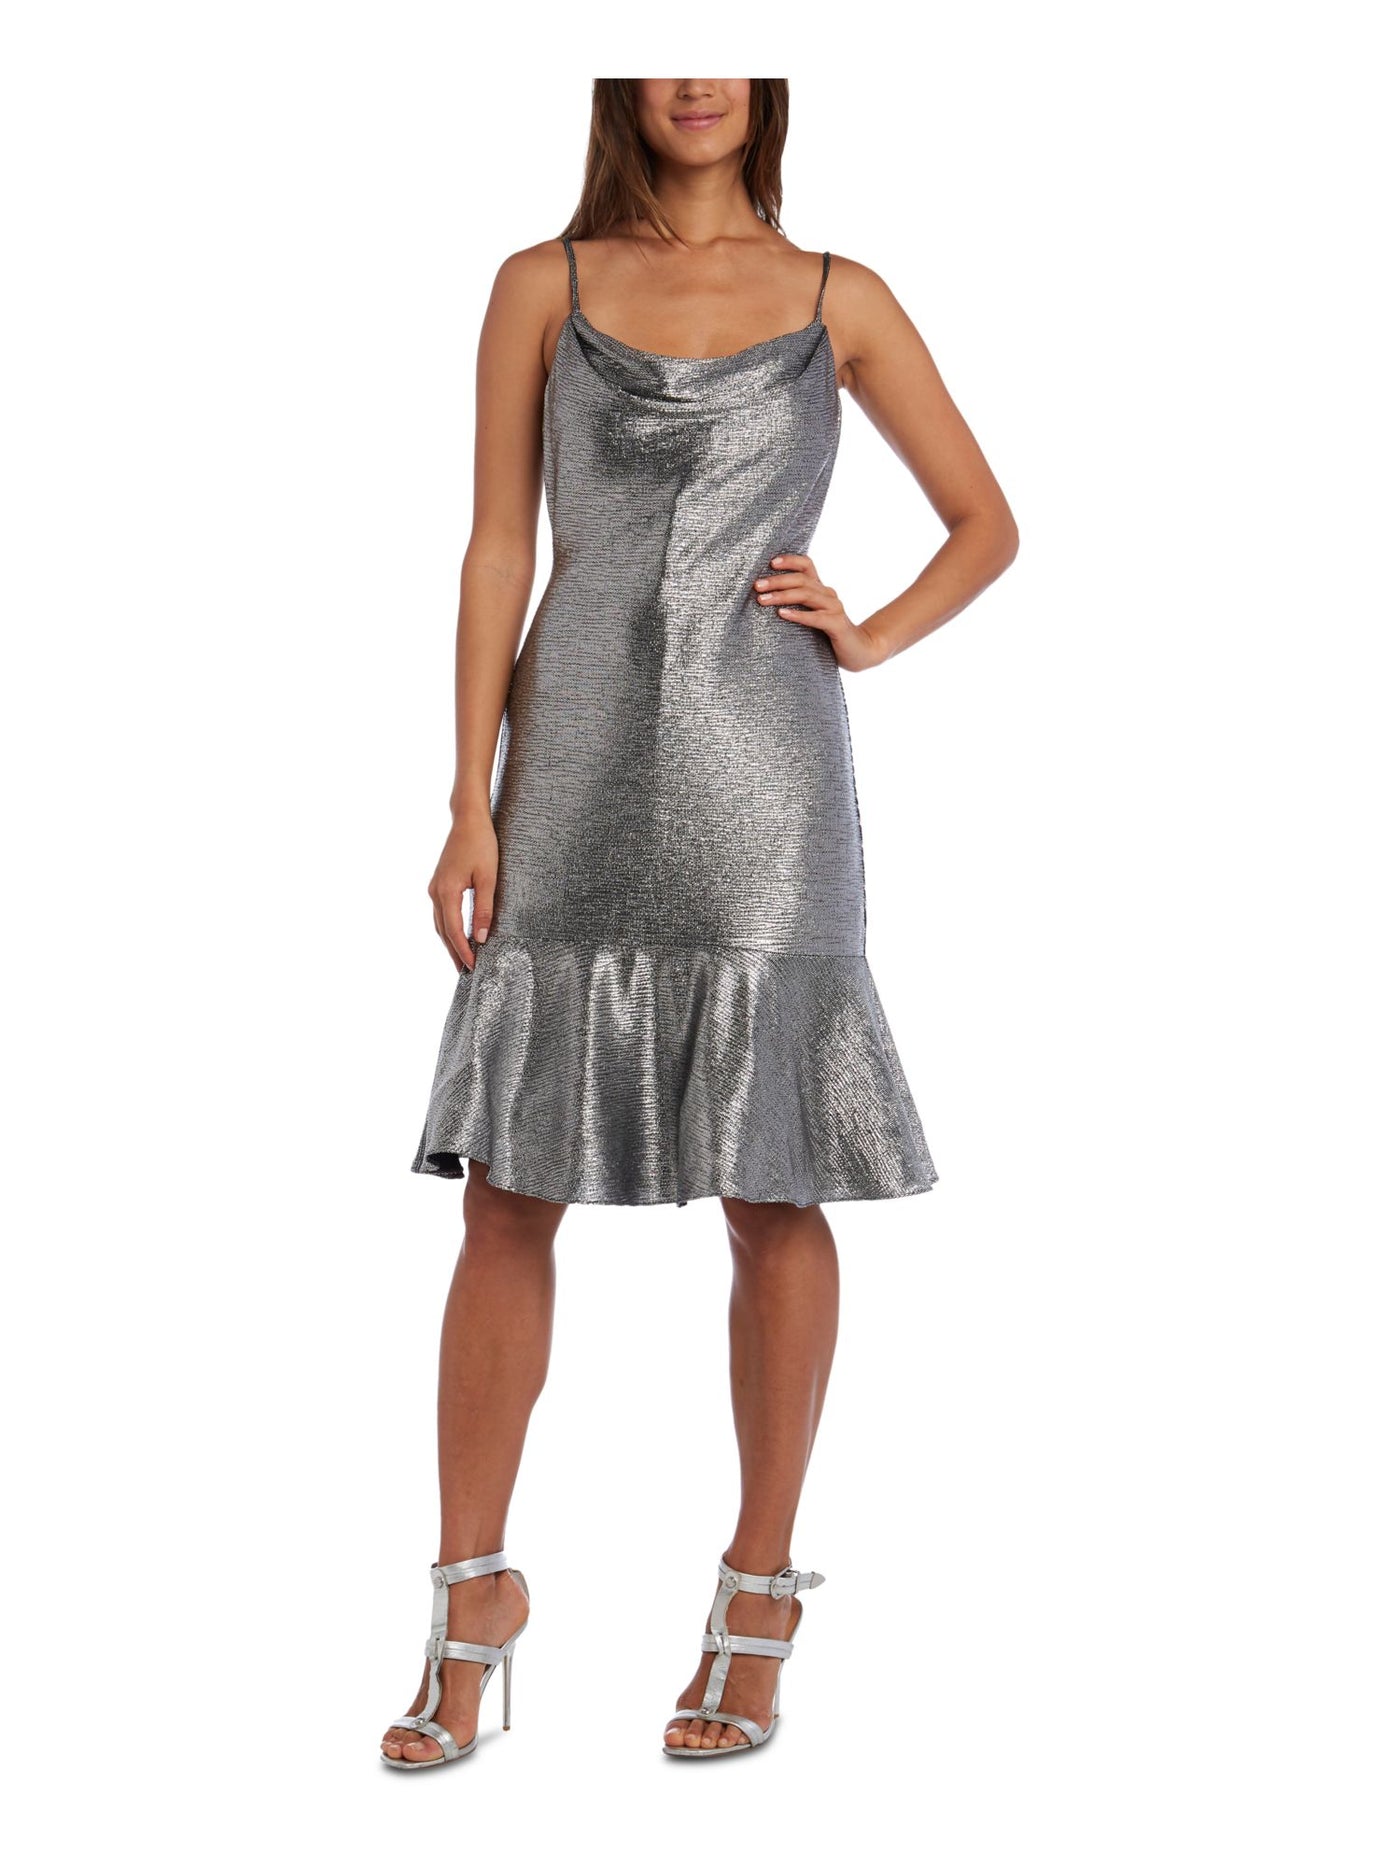 NIGHTWAY Womens Silver Spaghetti Strap Cowl Neck Knee Length Party Shift Dress Petites 10P